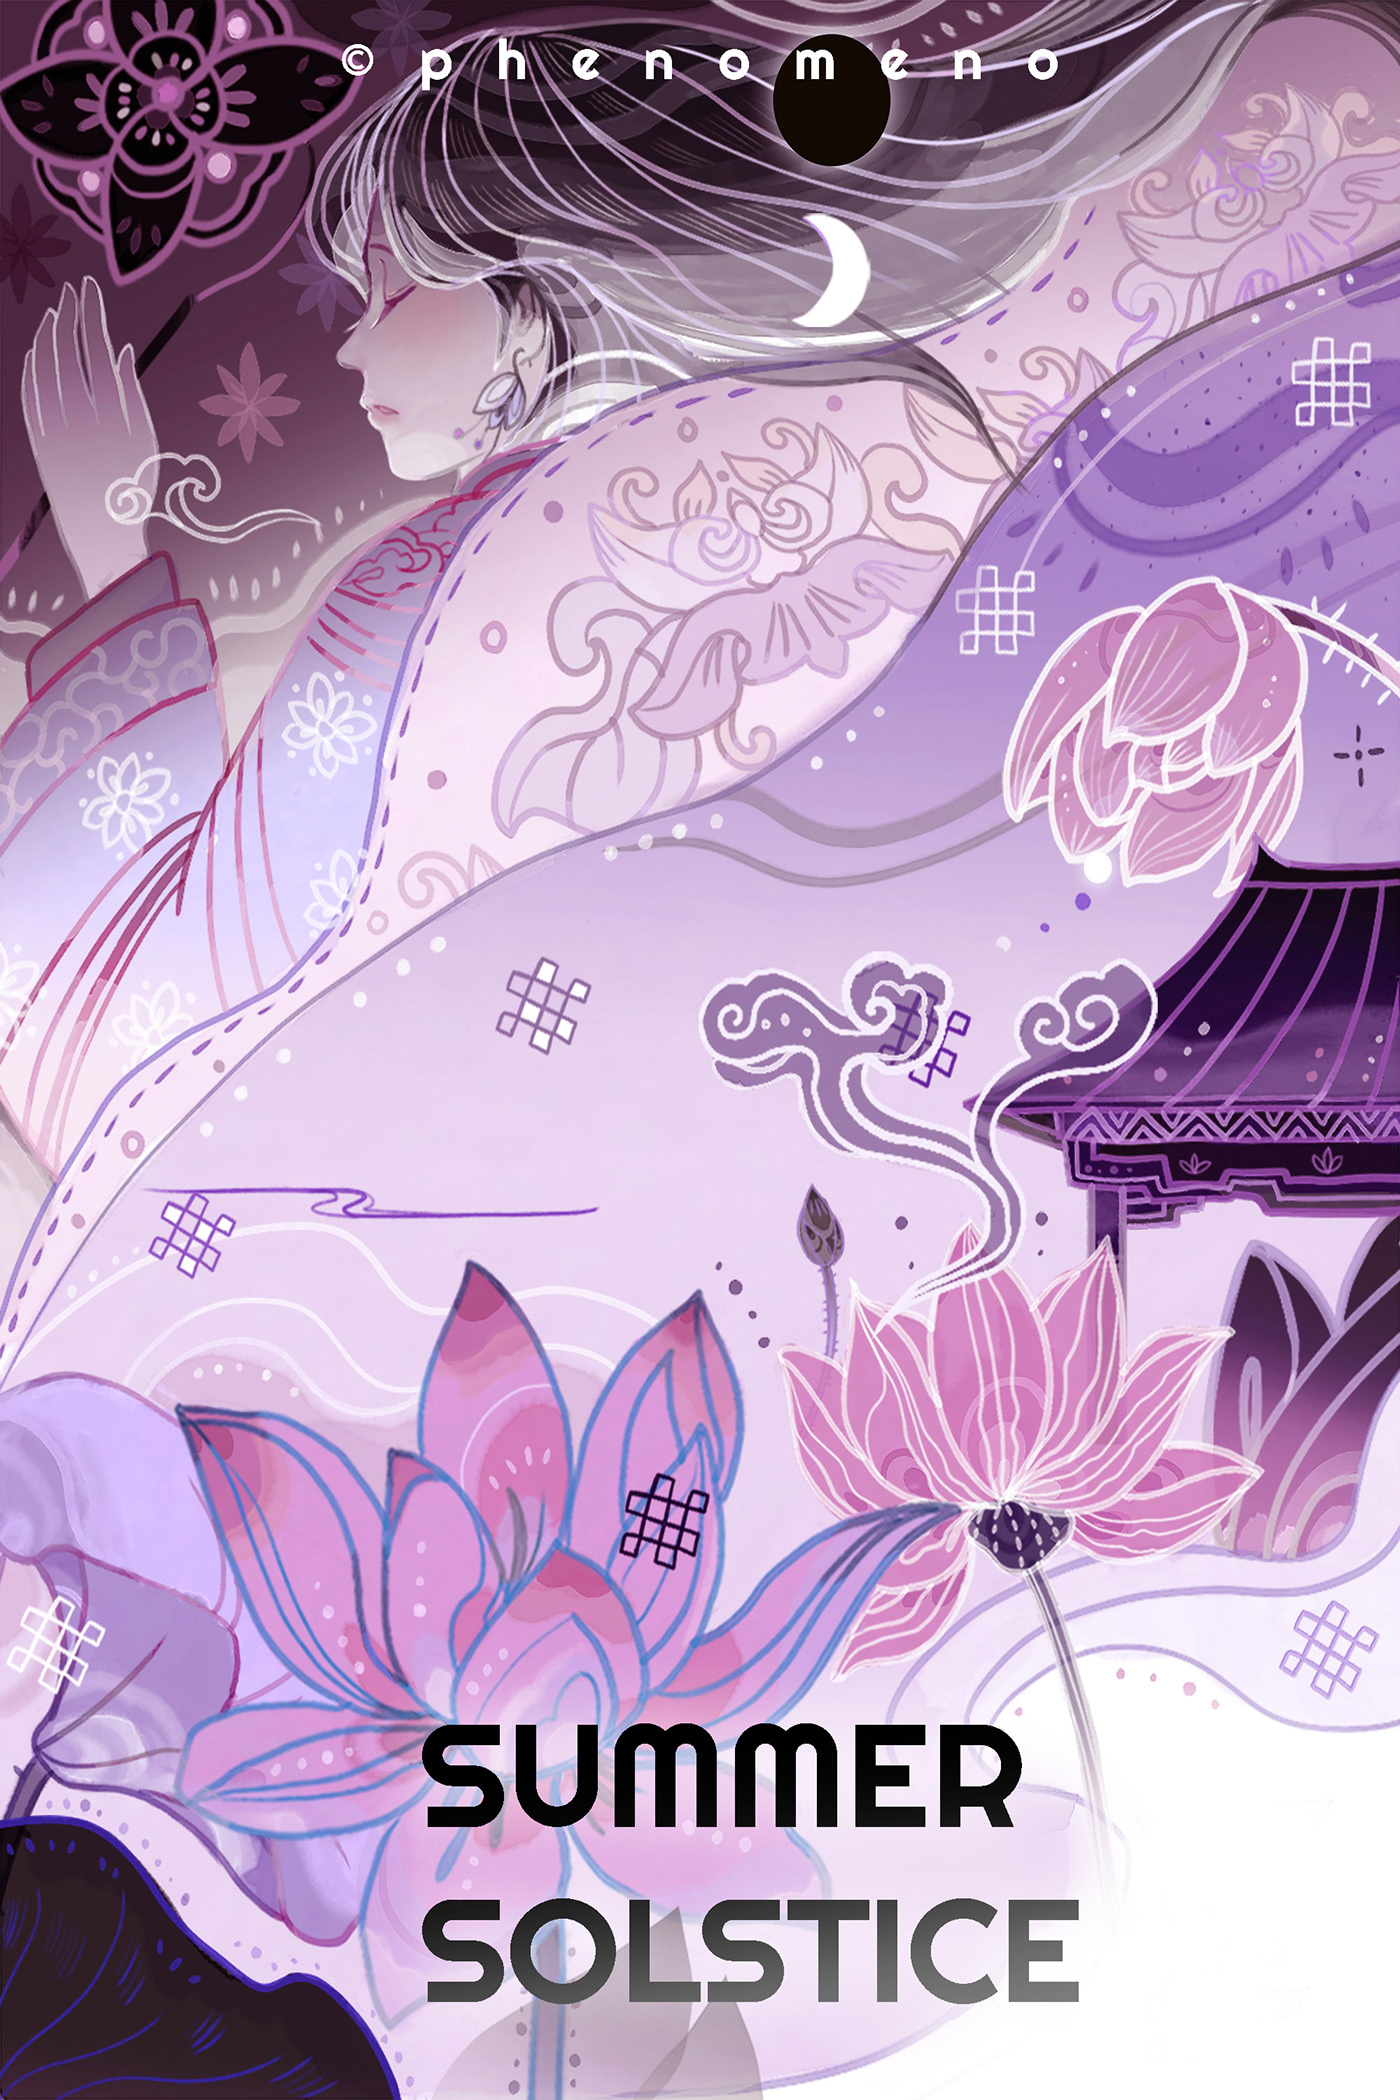 Chinese style decorate festival ILLUSTRATION 